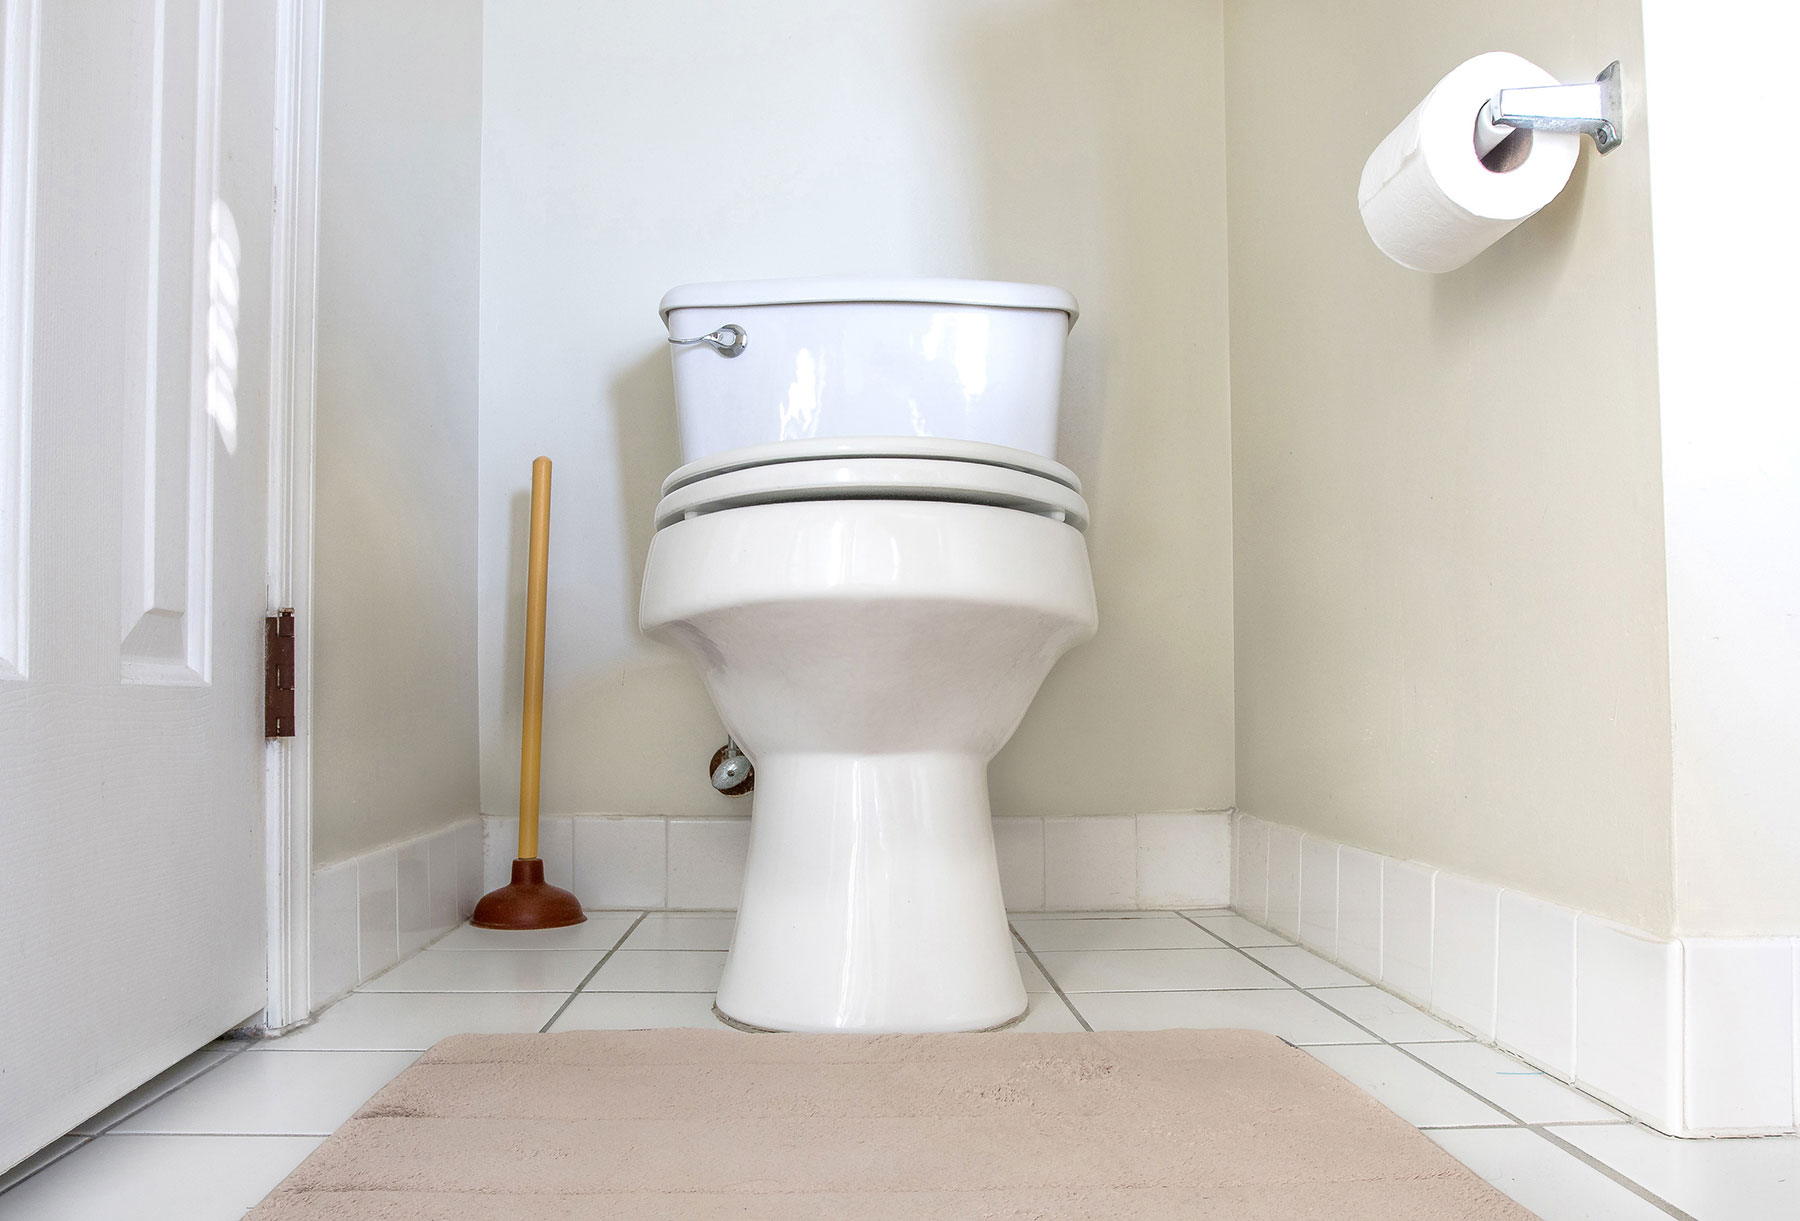 Top 5 Reasons for Clogged Toilets